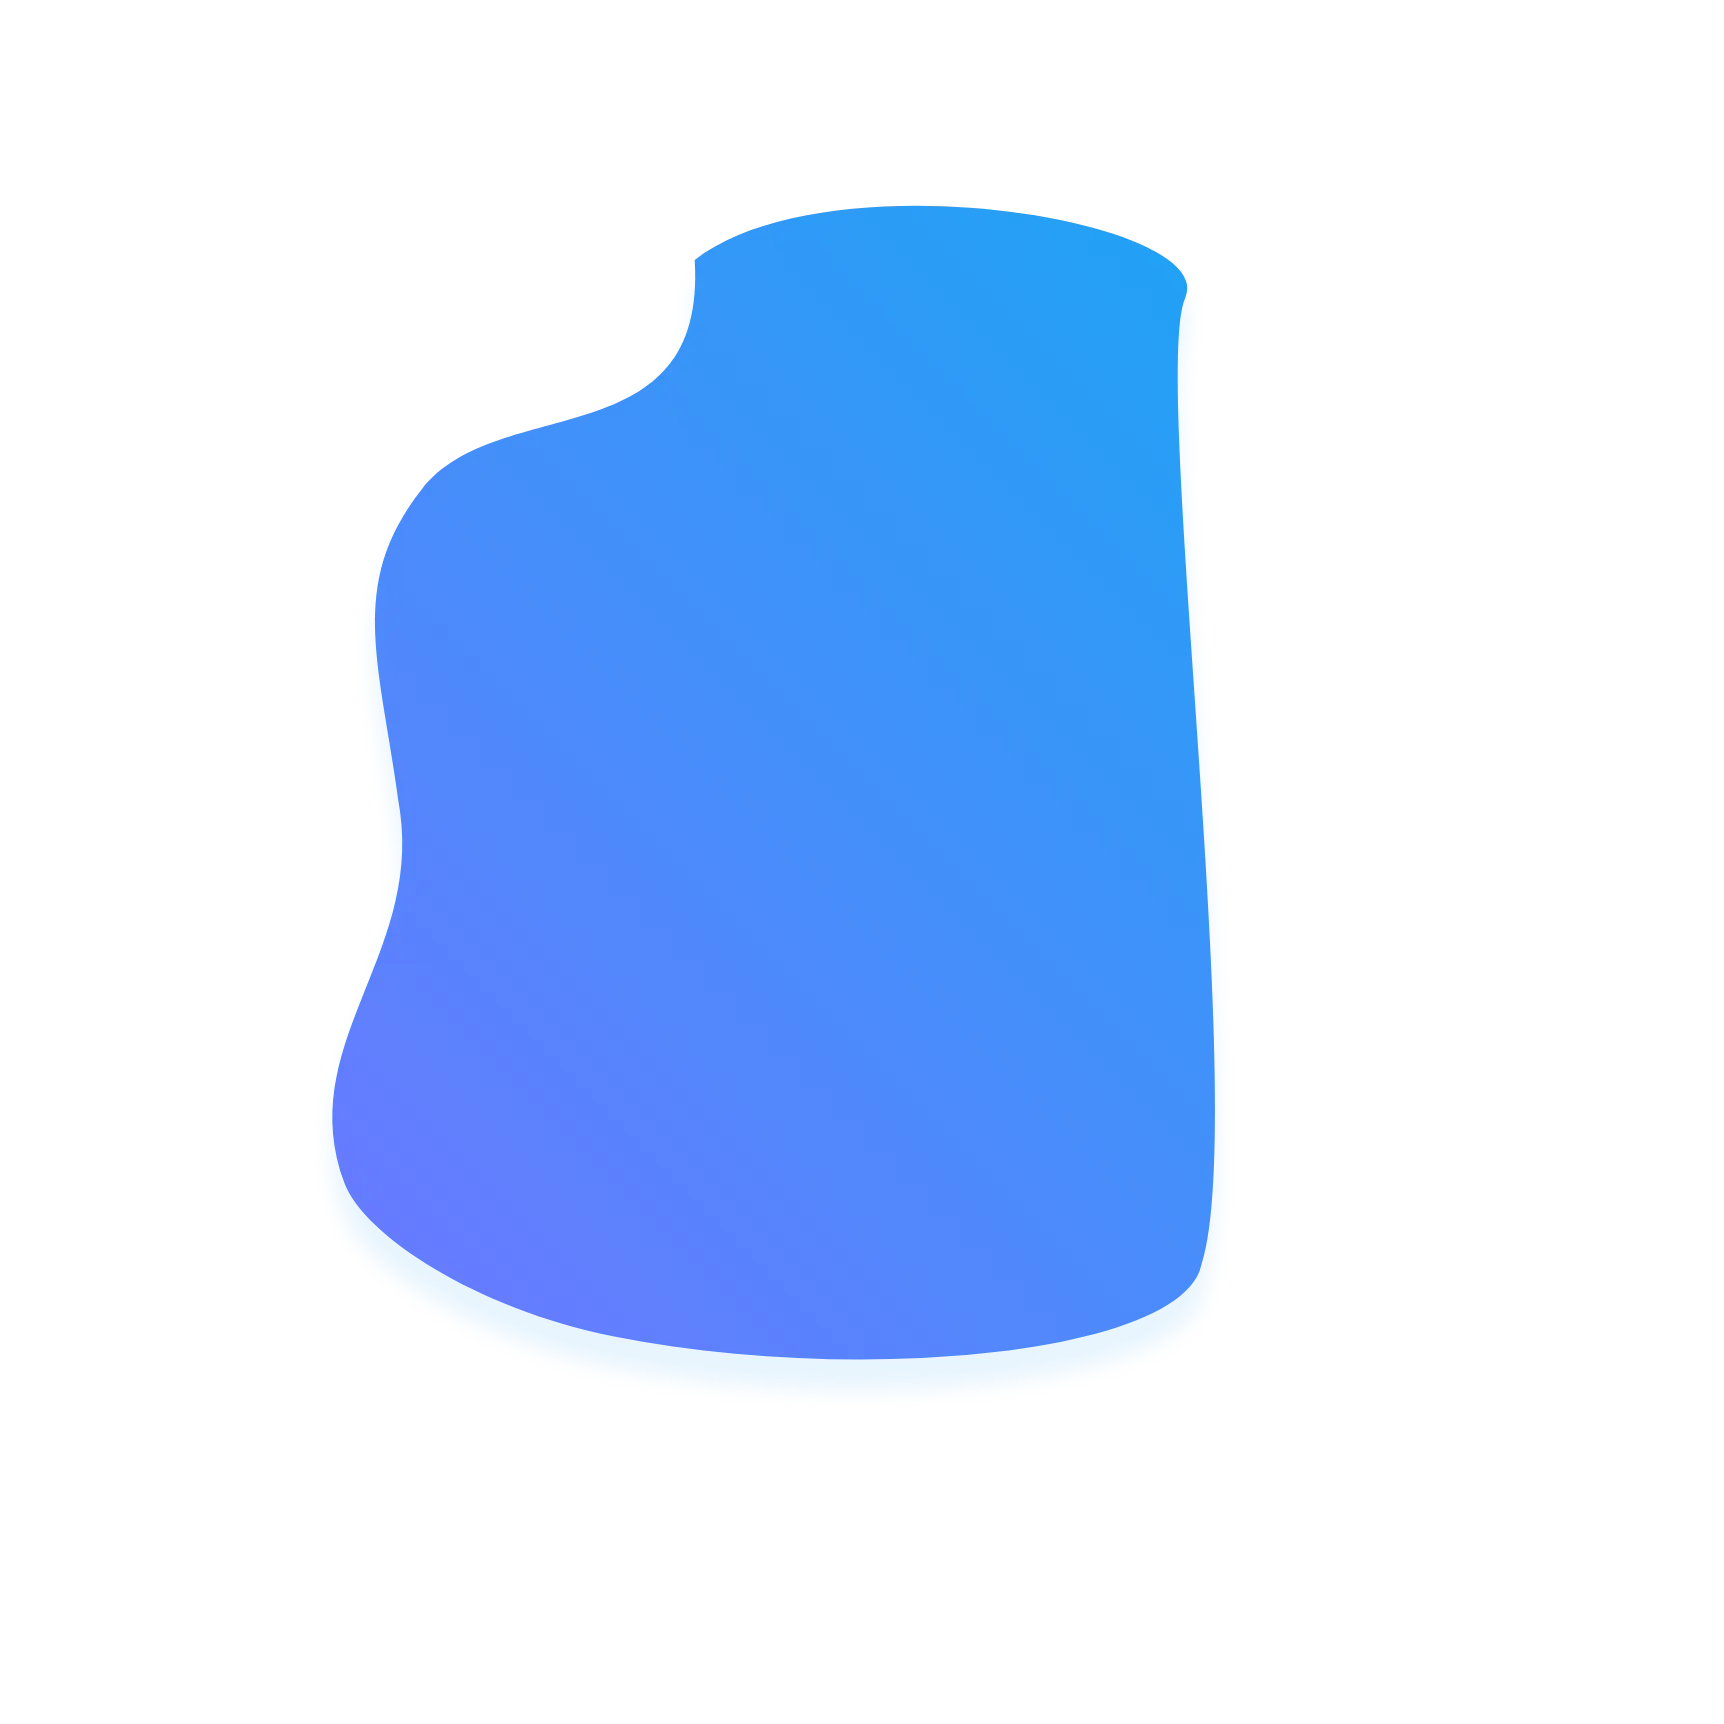 A blob SVG acts as a background here